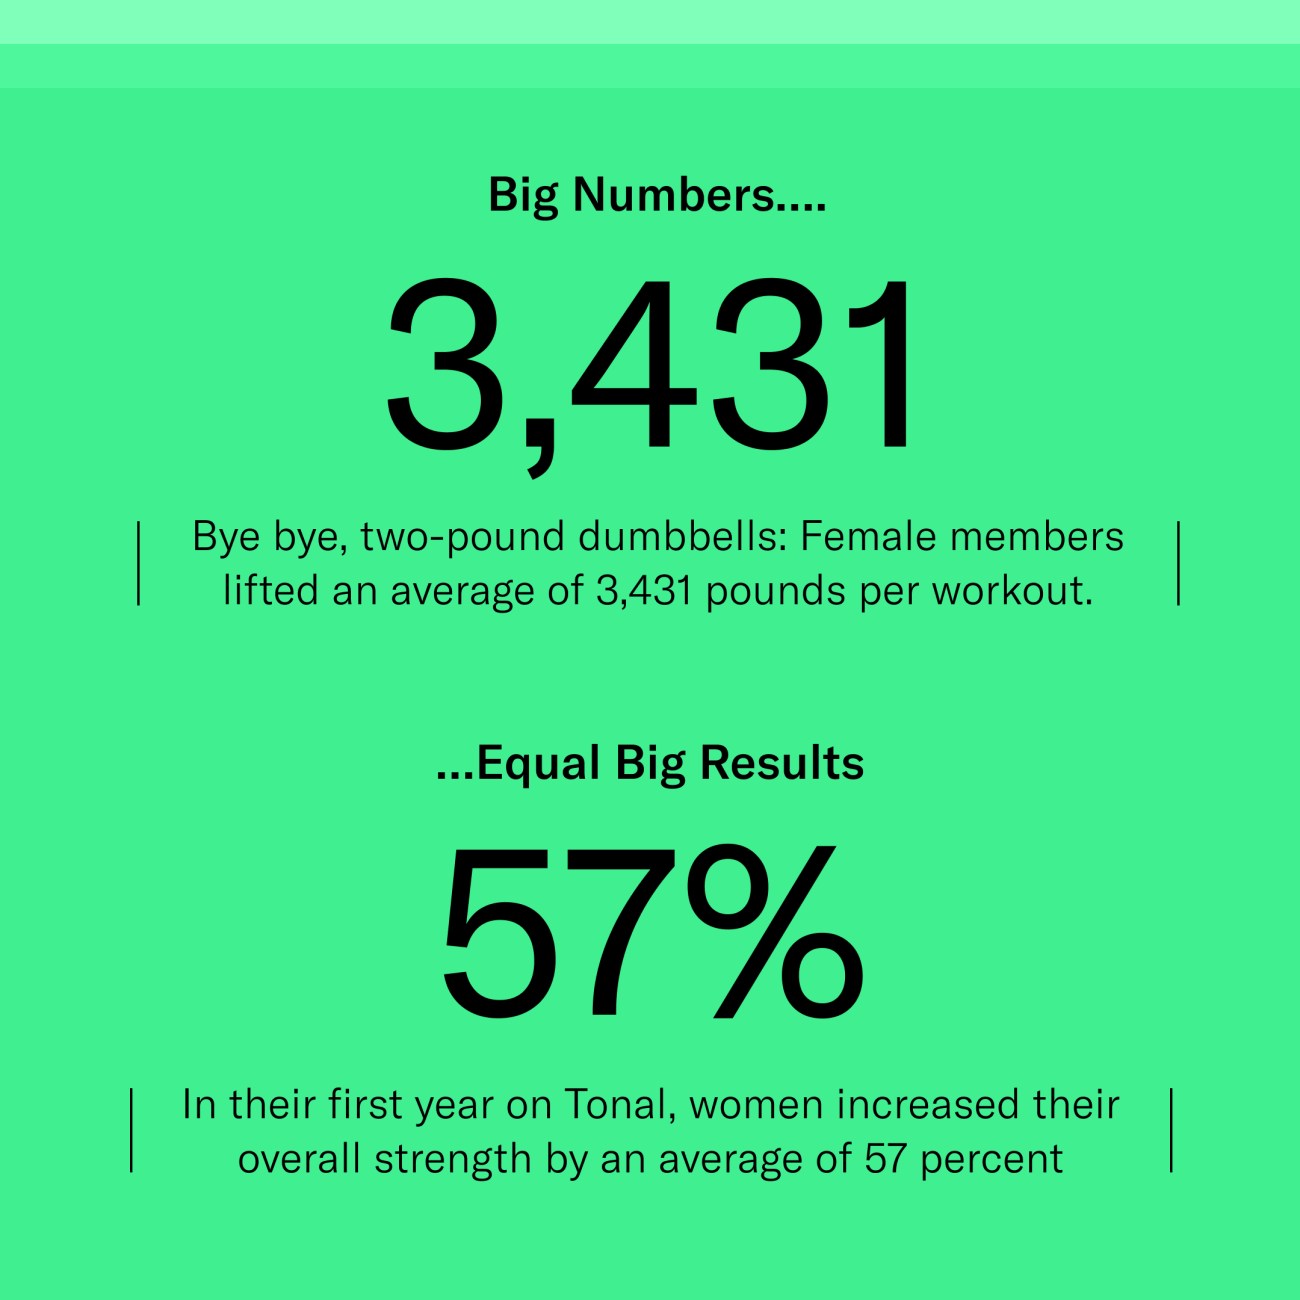 Big Numbers….Equals Big Results
Bye bye, two-pound dumbbells:
Female members lifted an average
of 3,431 pounds per workout.
57%

In their first year on Tonal, women
increased their overall strength
by an average of 57 percent